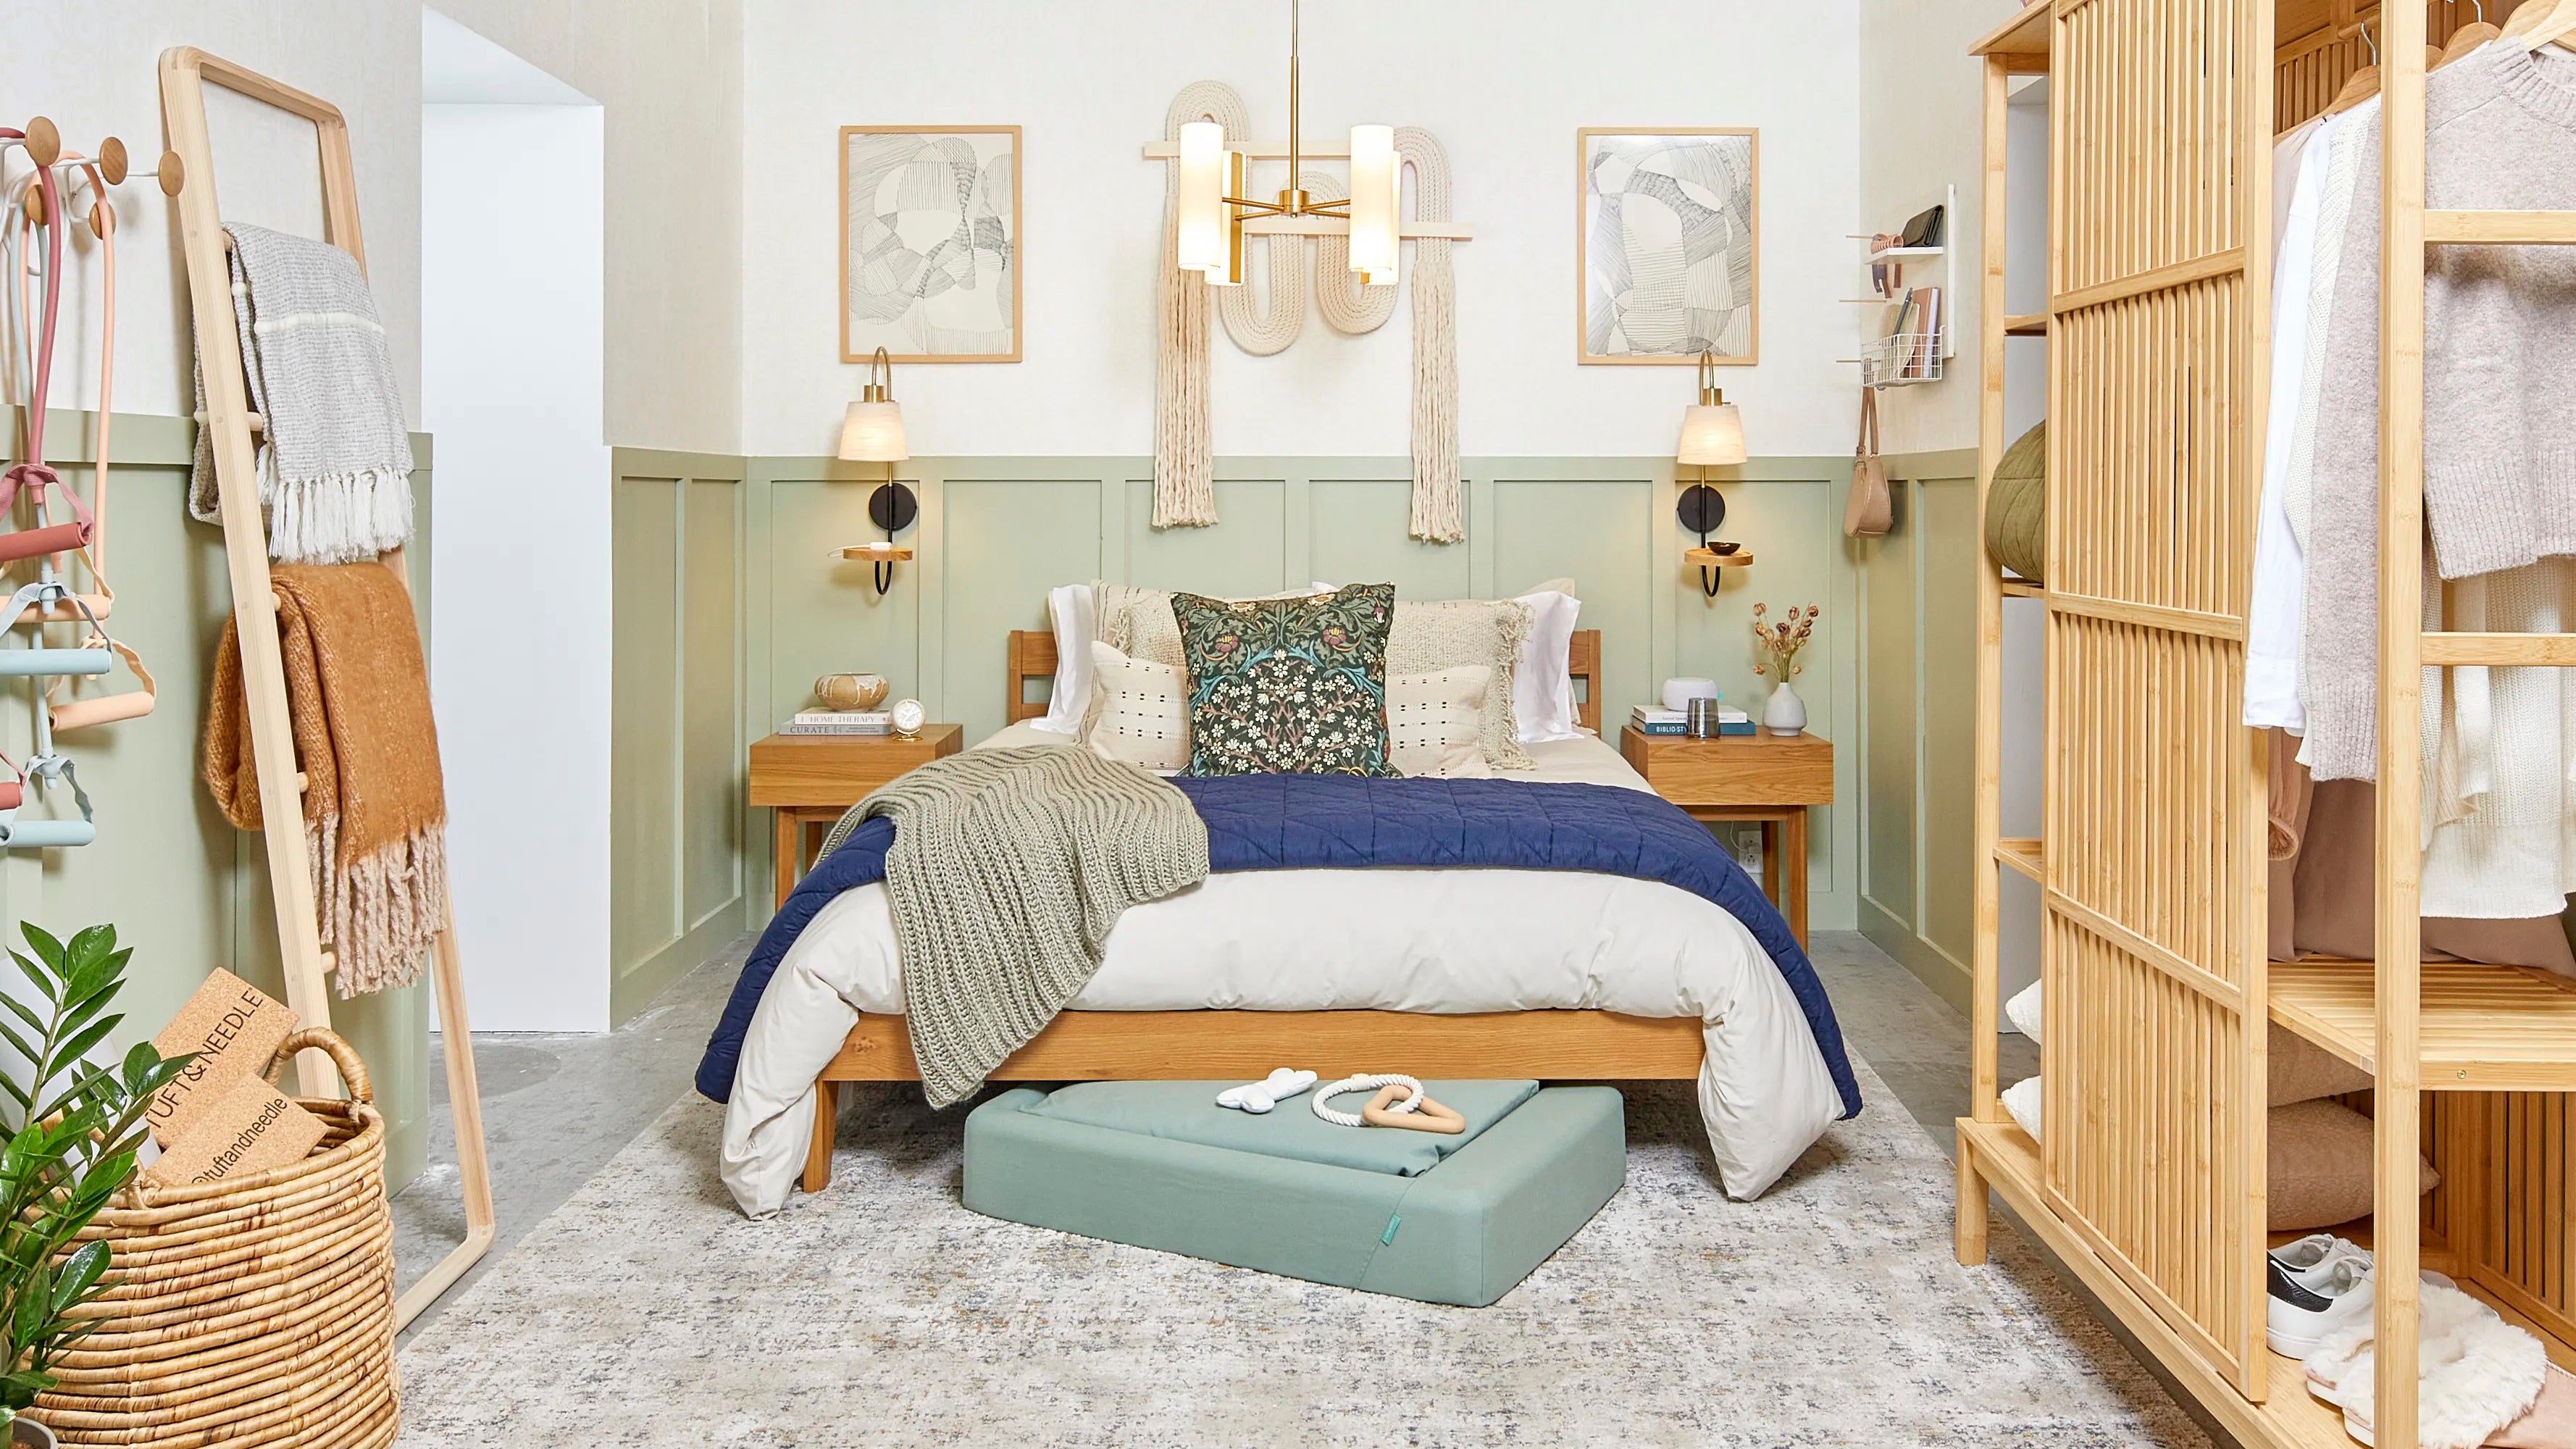 The Apartment Therapy bedroom designed by Anita Yokota using warm earthy tones - greens, tans, blues, and rust colors